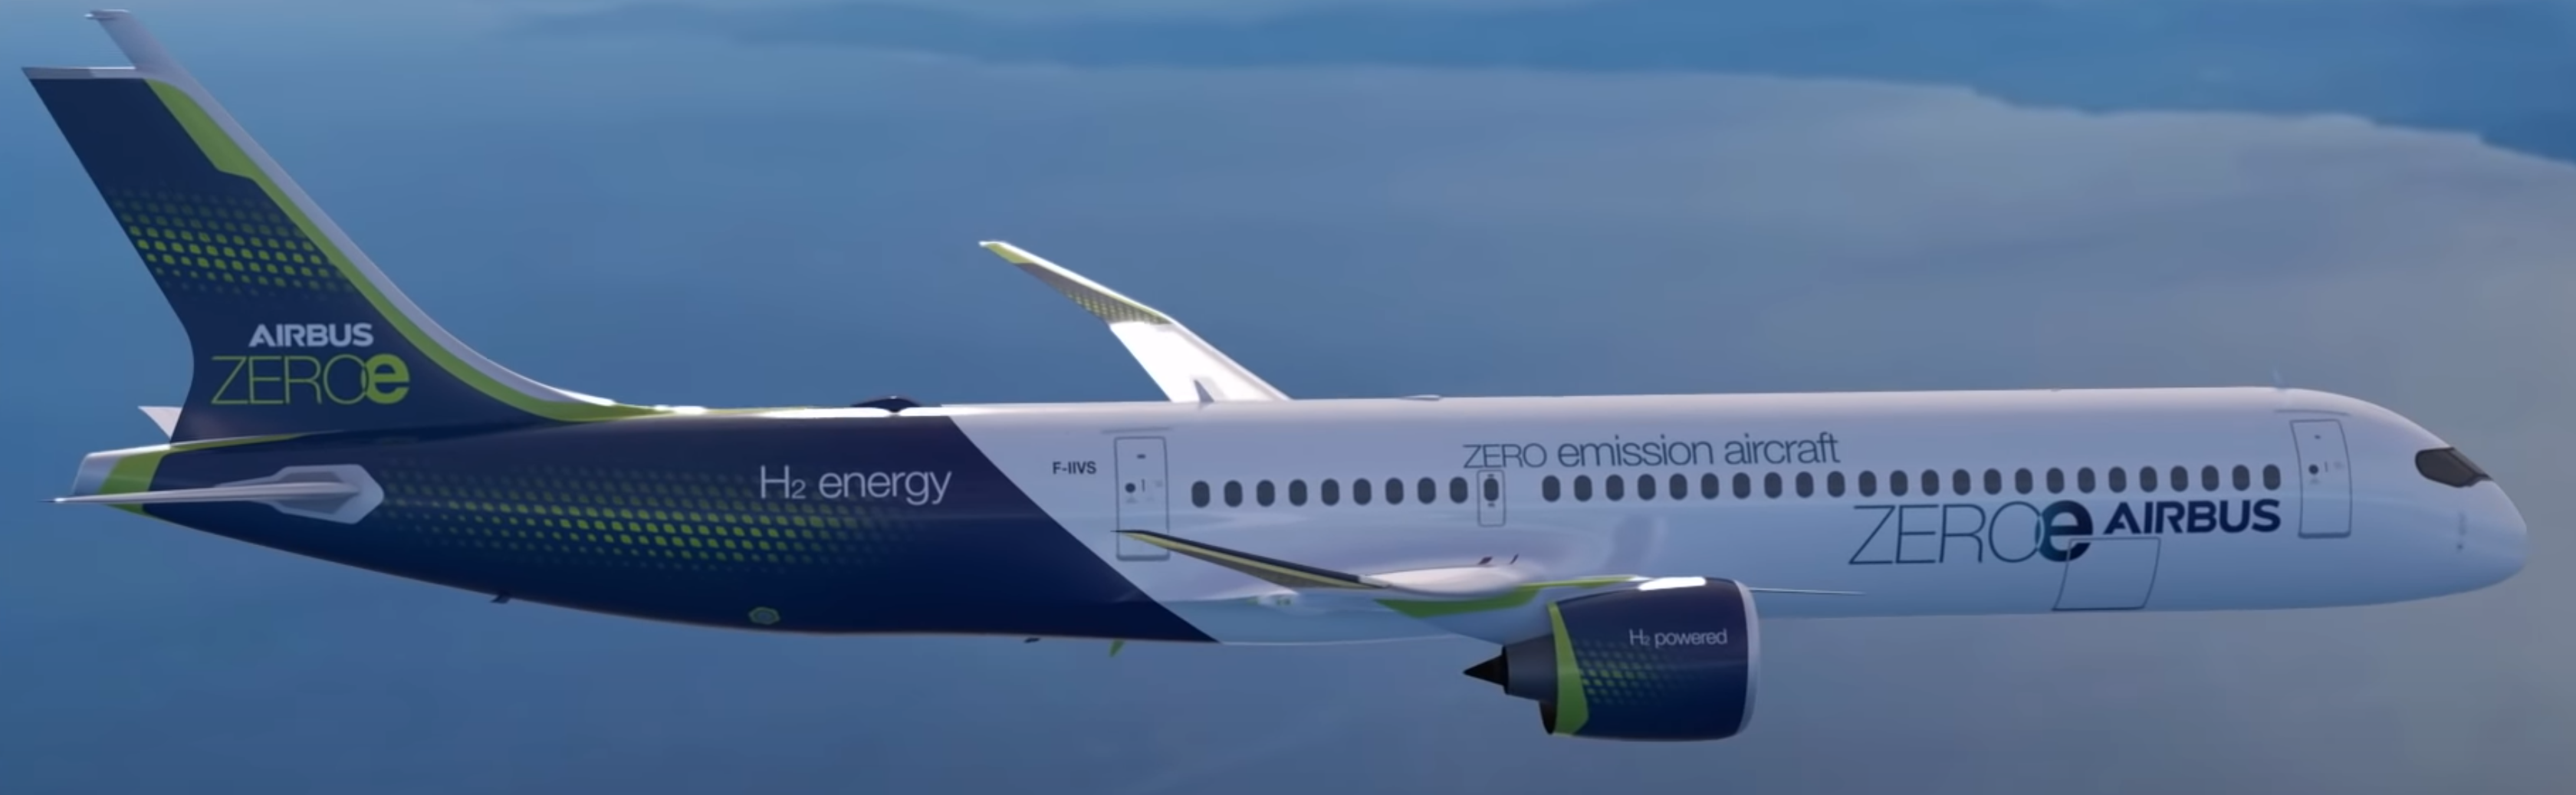 Could An A320 neo Be Rebuilt As A ZEROe Turbofan? | The Anonymous Widower